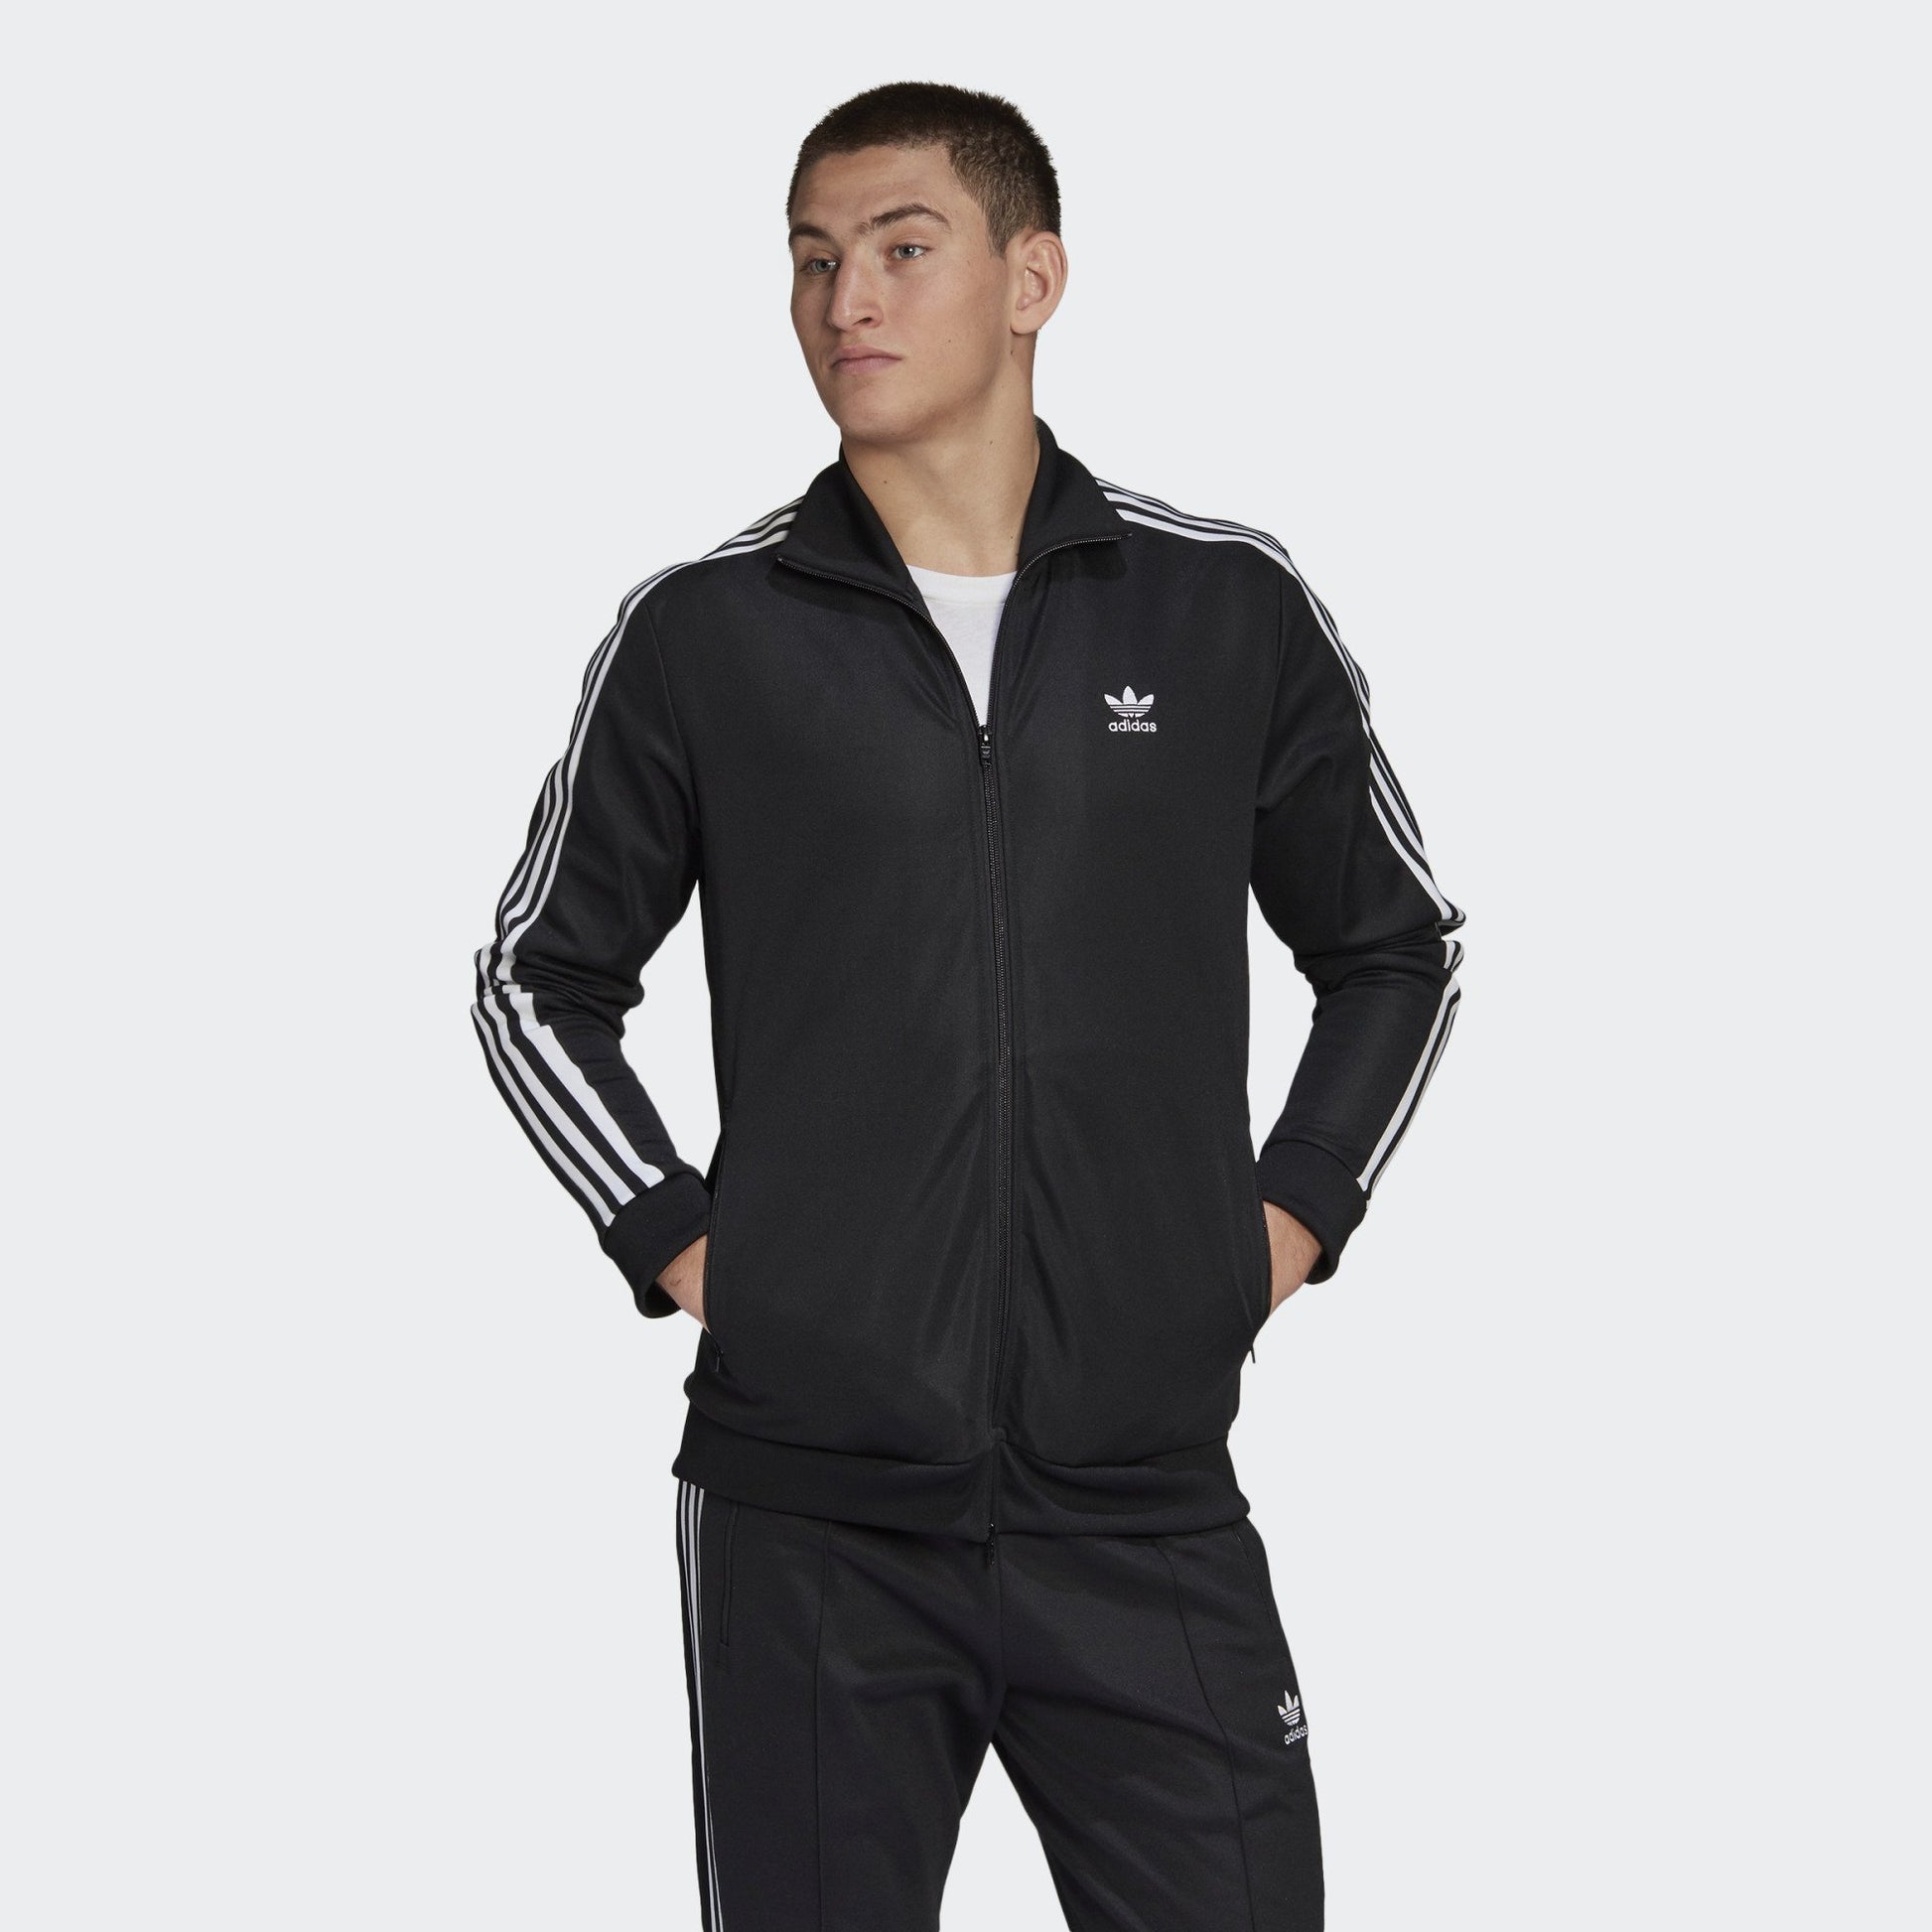 BB TRACK TOP BLACK - Discount Store